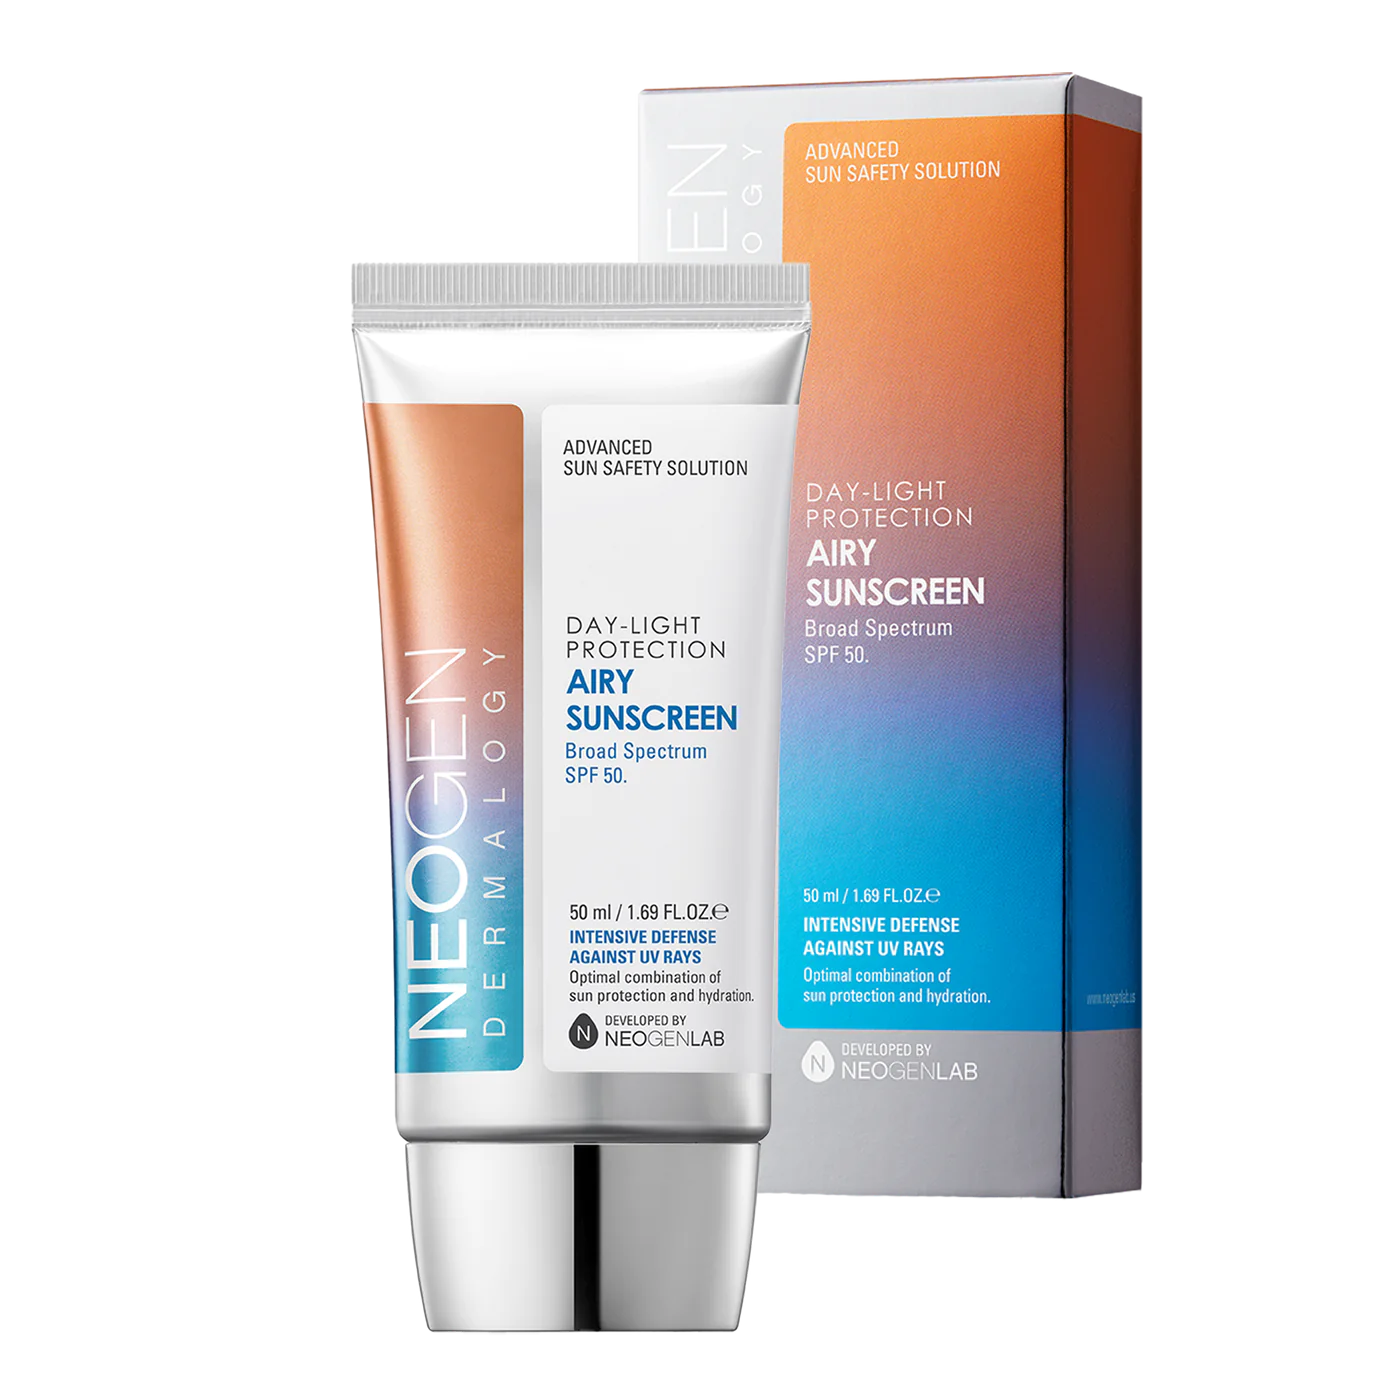 NEOGEN's new Dermalogy Day-Light Protection Airy Sunscreen